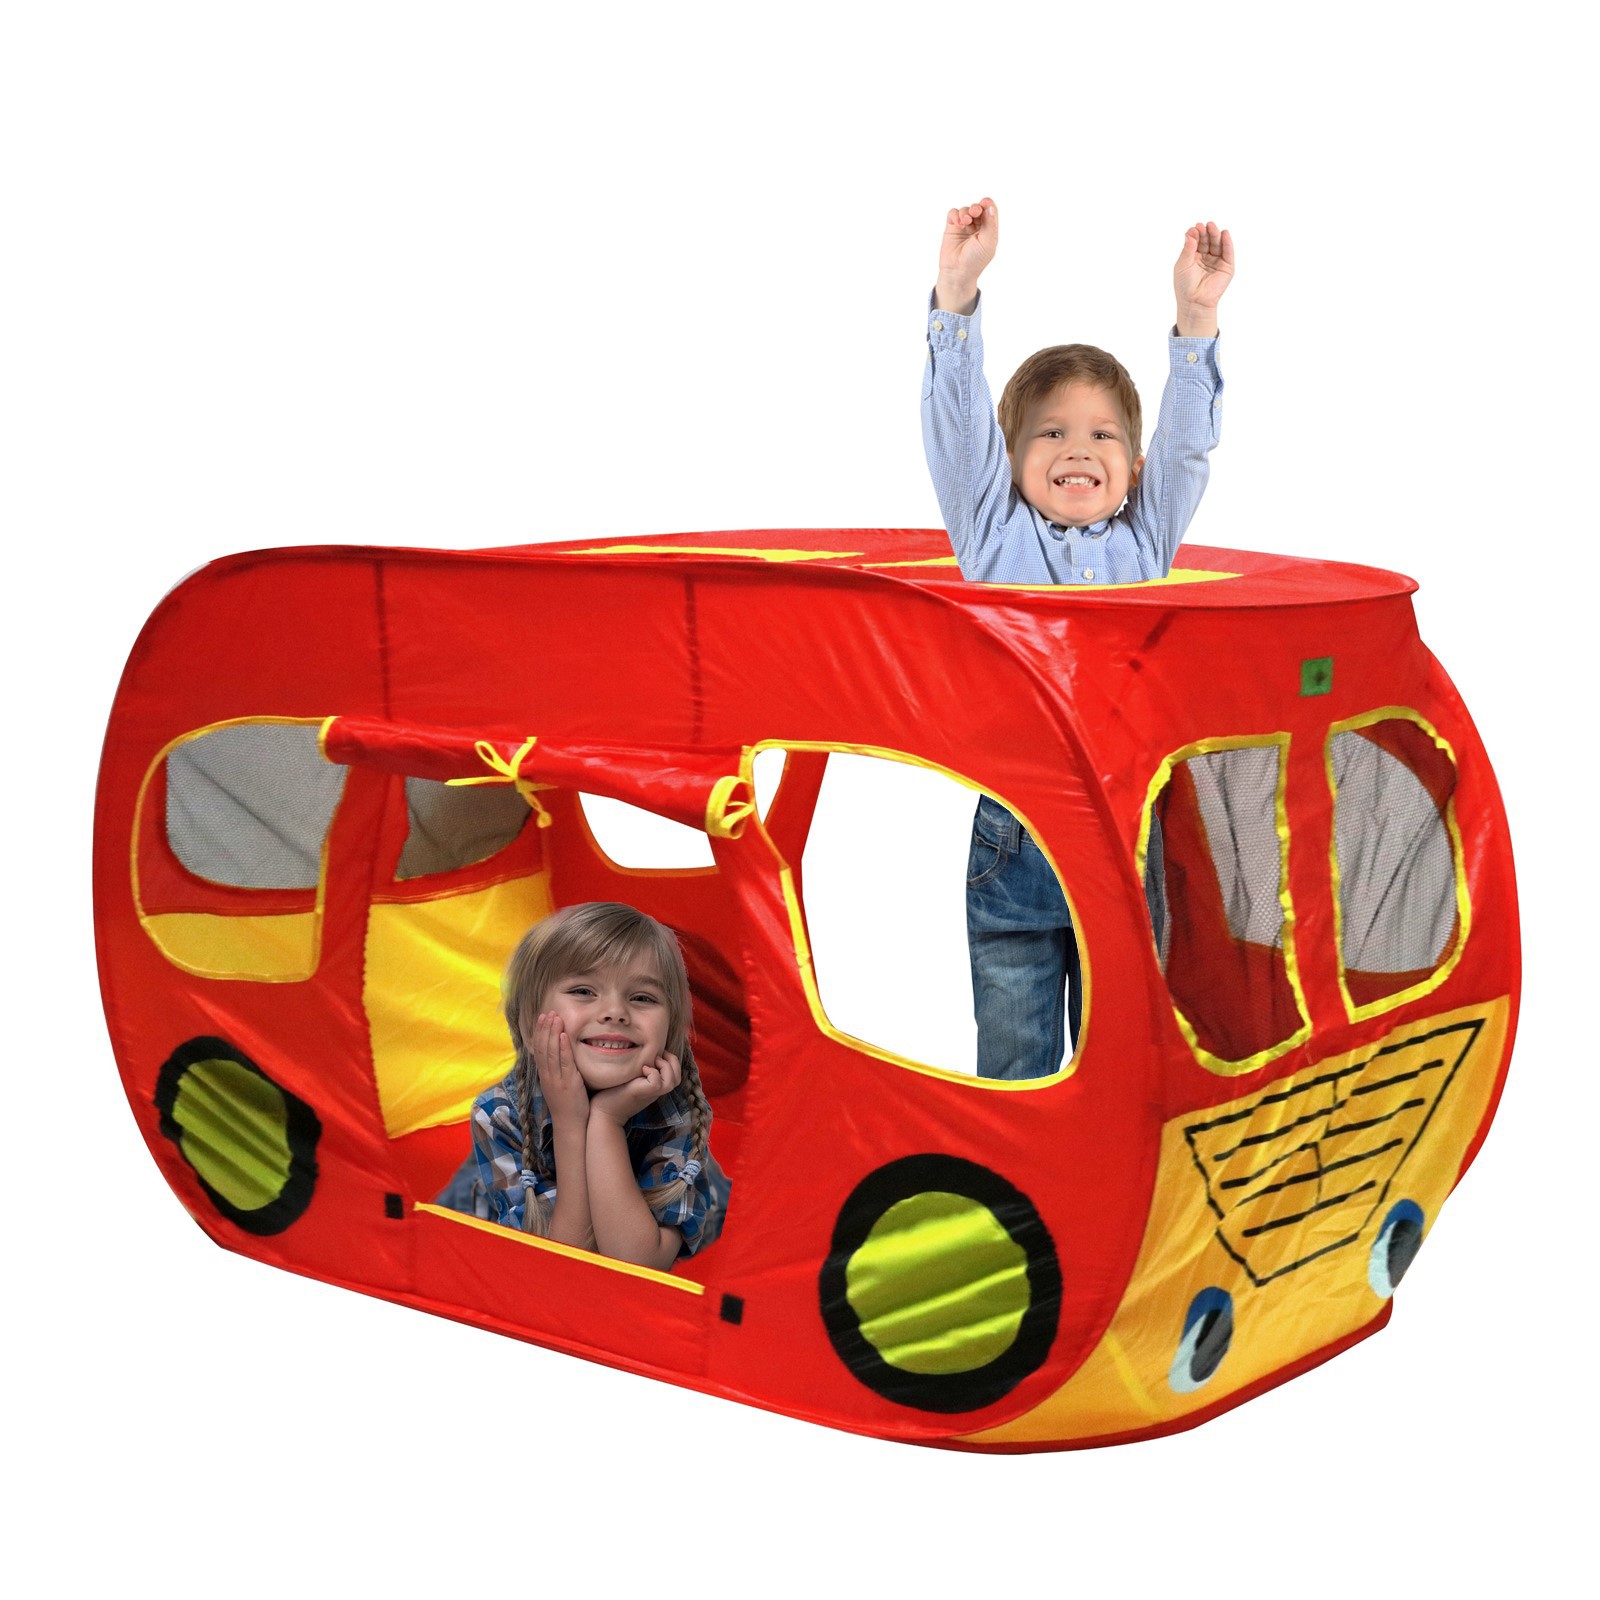 Kids Pop Up Play Tent Foldable Indoor Outdoor School Bus Playhouse Toy for Children Toddlers Boys And Girls Boosts Imagination Creativity Play